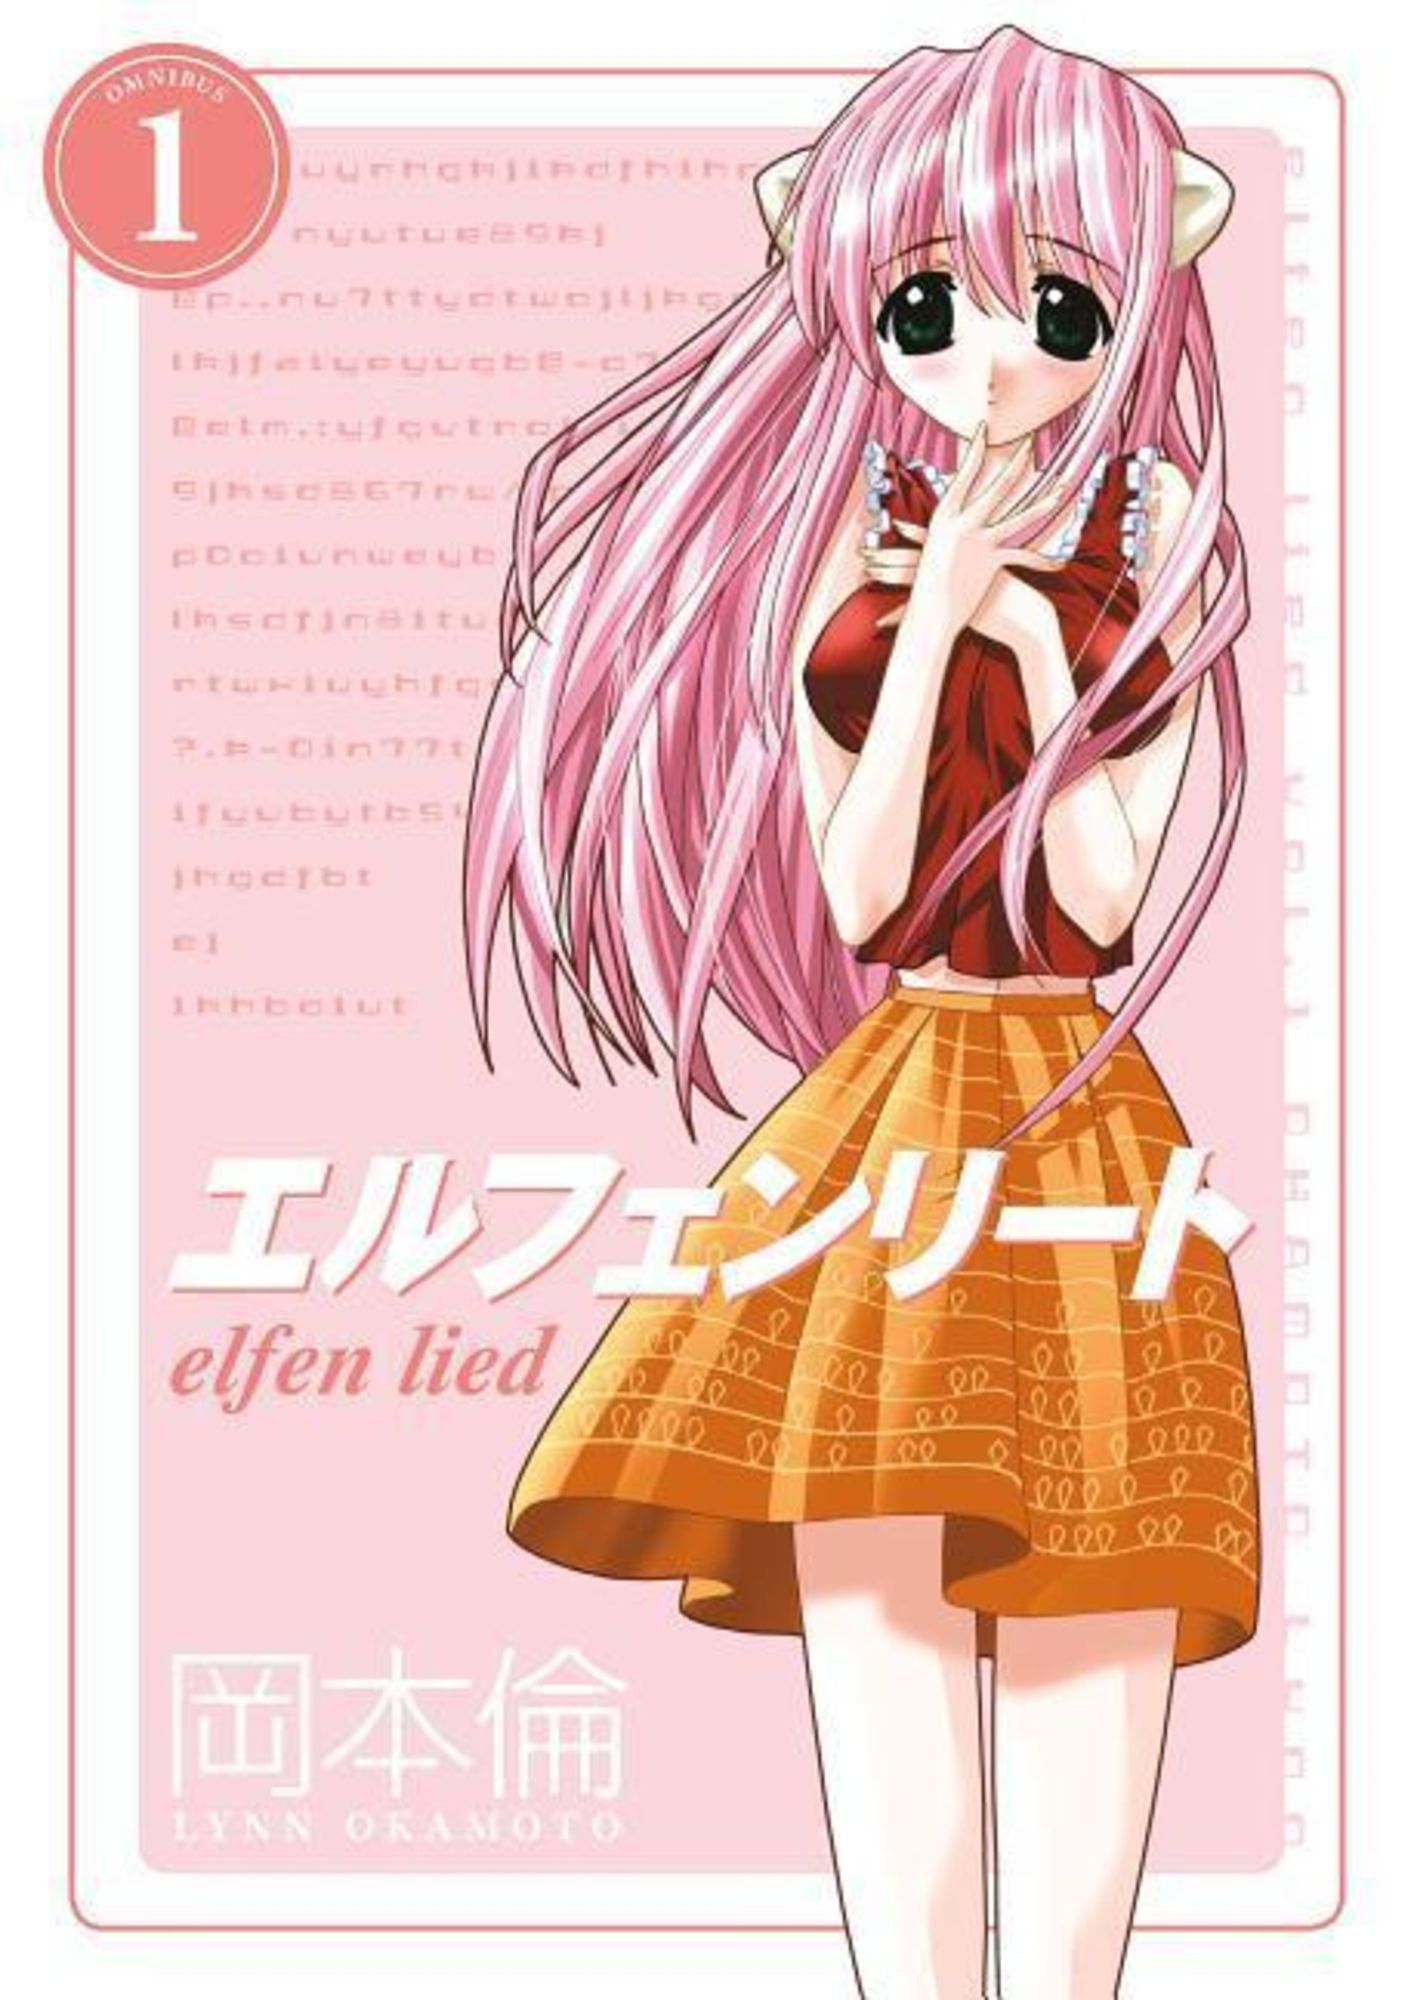 danielle ditty recommends elfen lied episode 3 pic